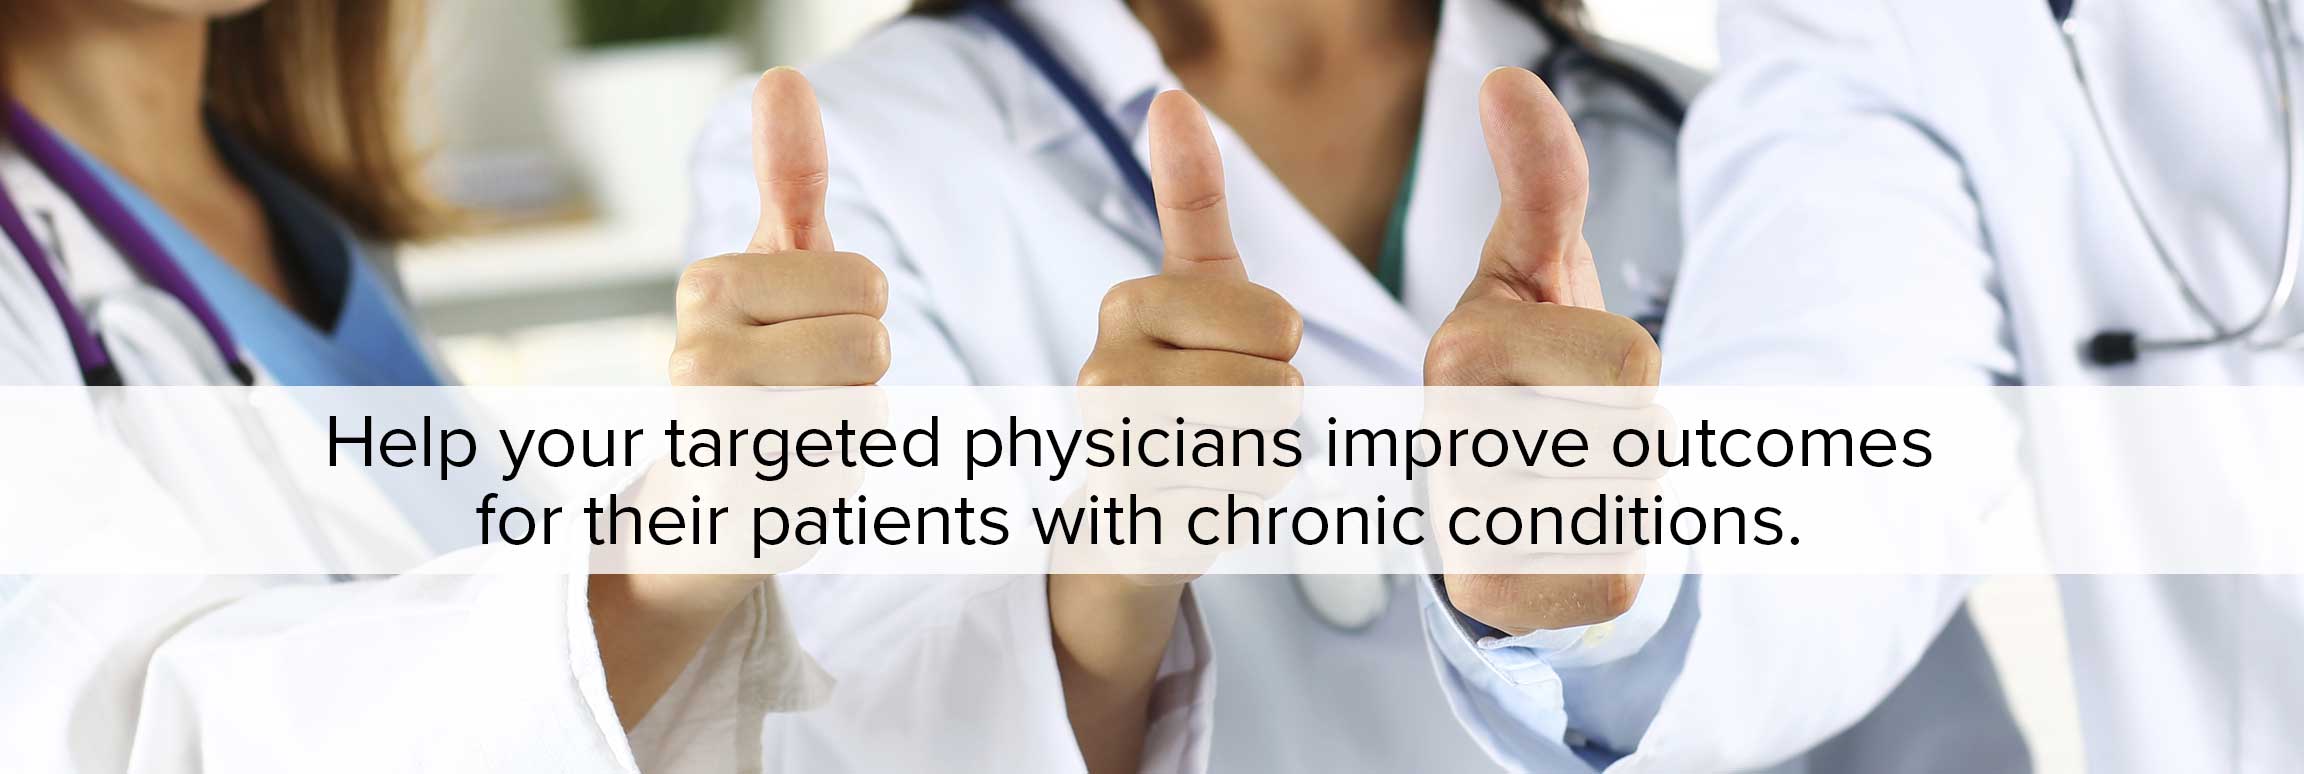 Physicians with Thumbs Up